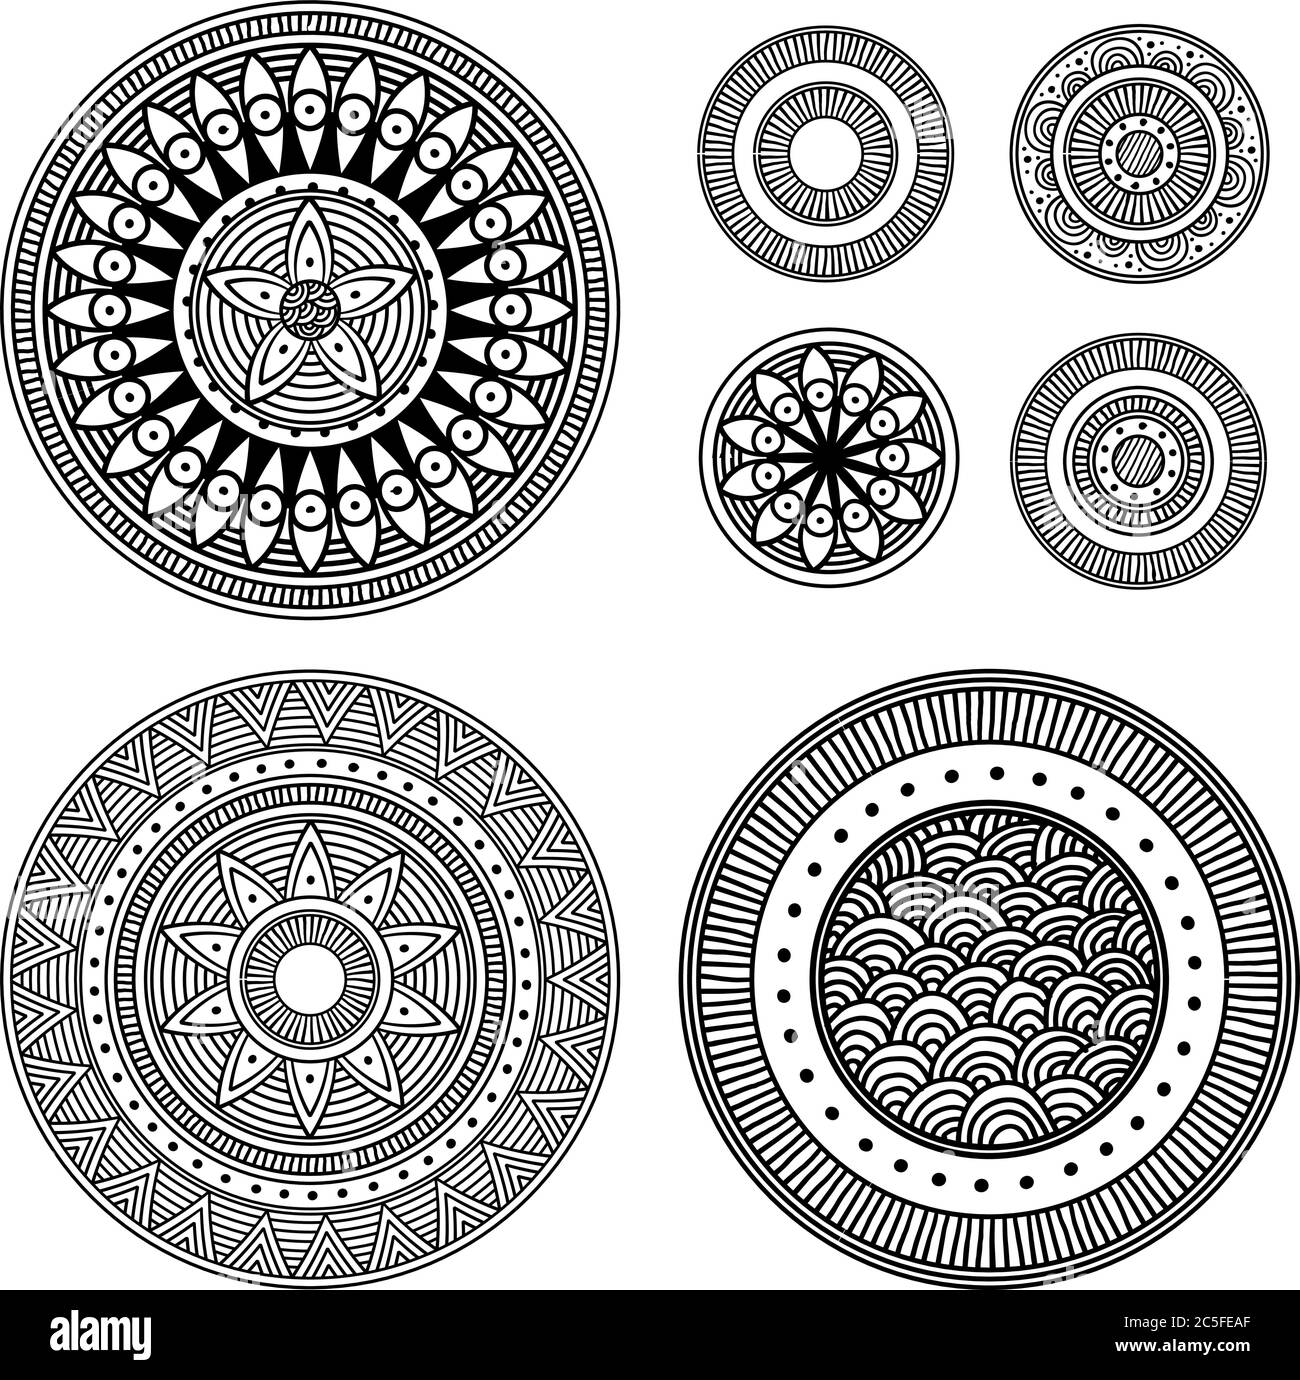 Set of design elements - patterned circles. Black and white, vector illustration. Stock Vector